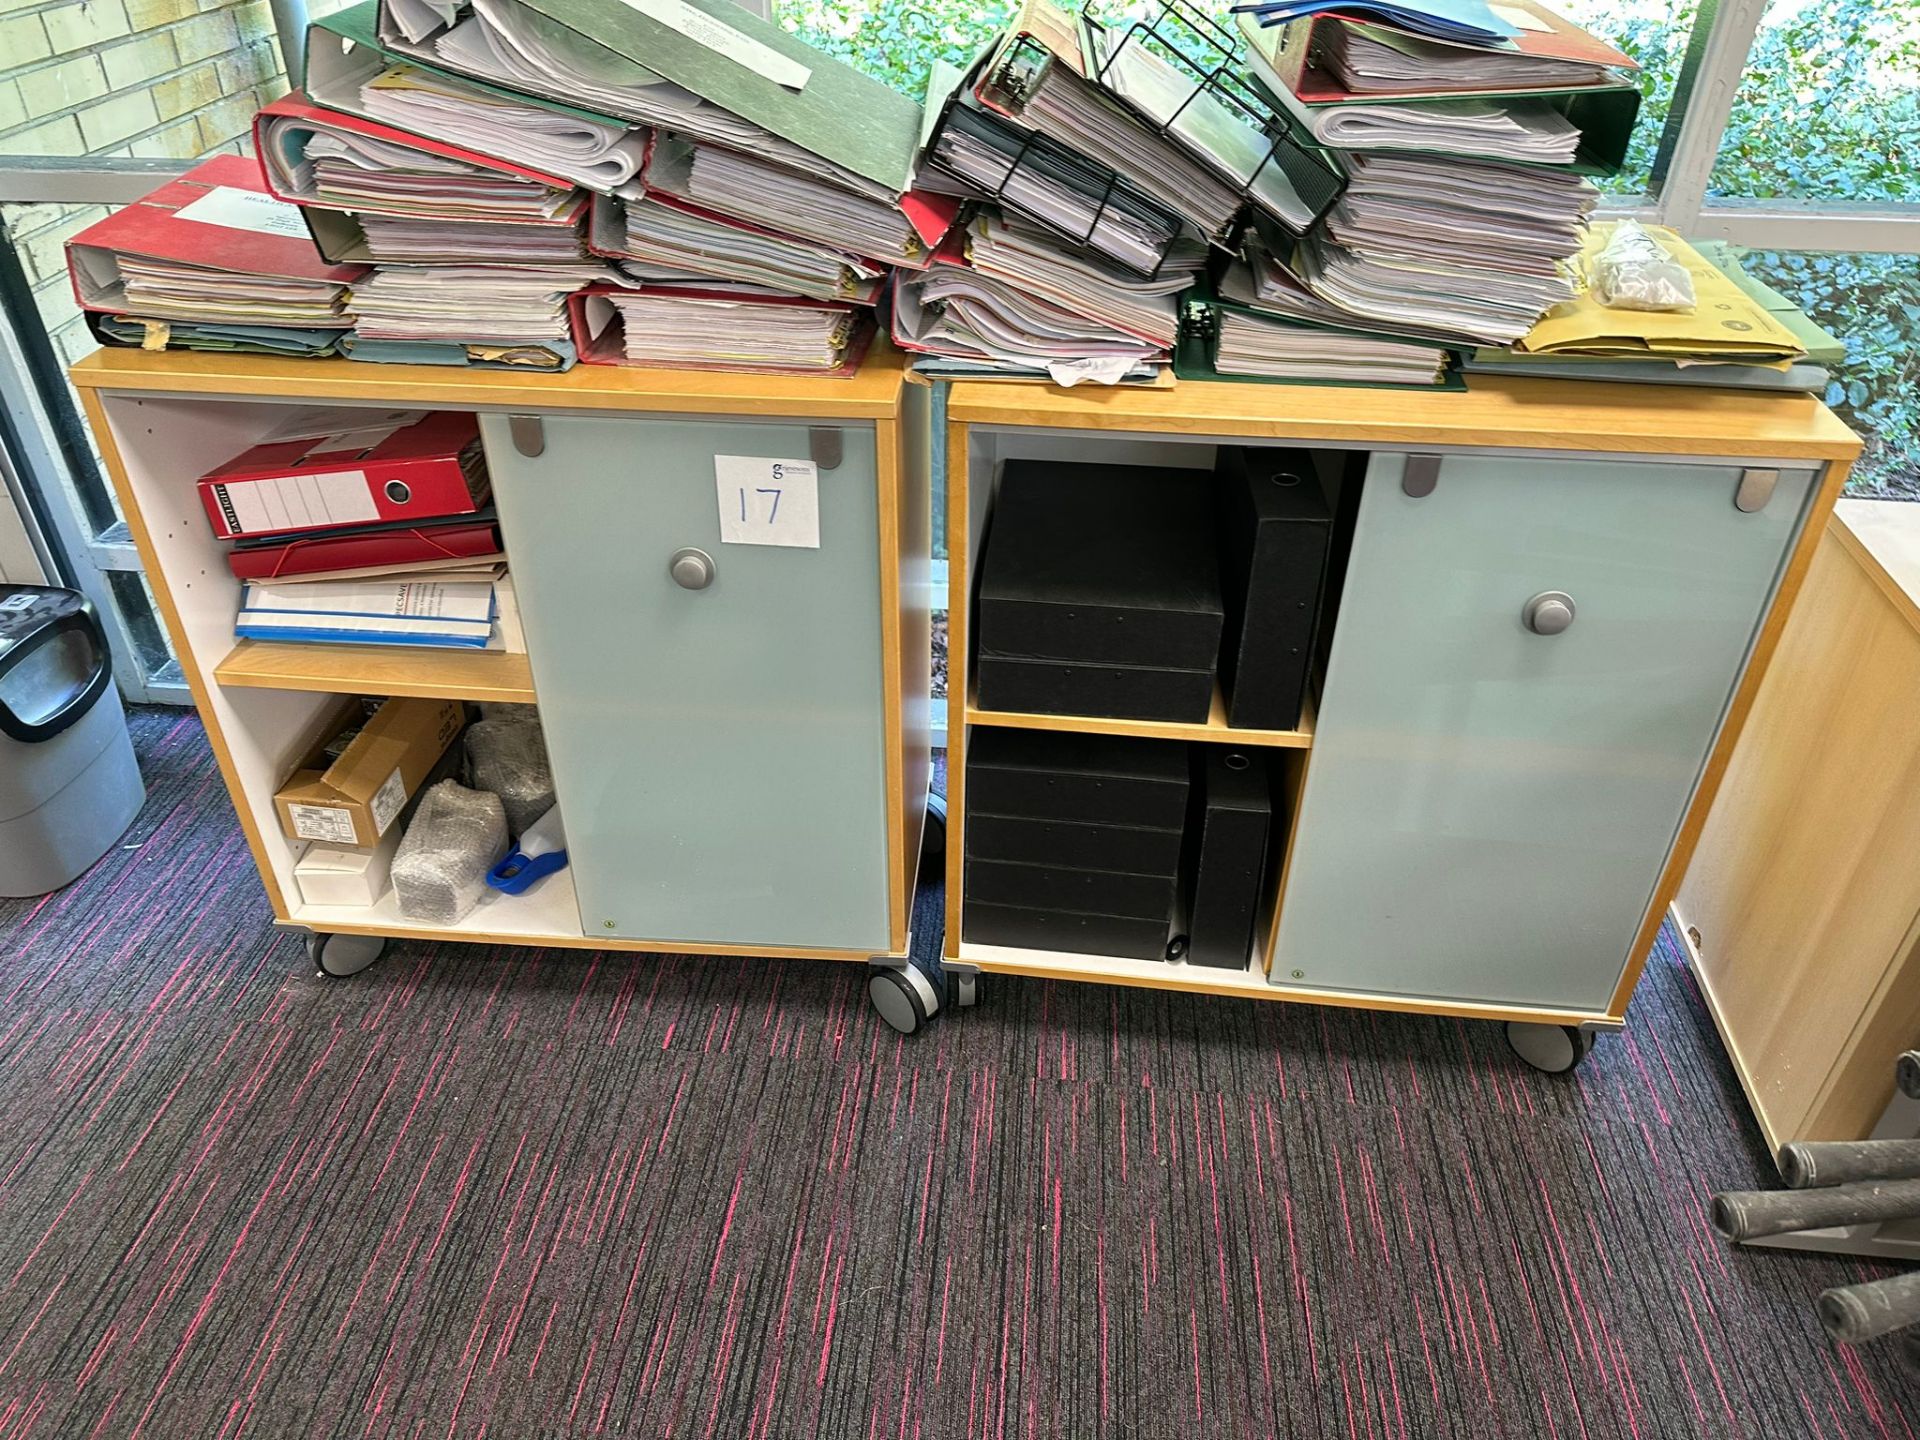 2 Filing Cabinets With Castors - Image 2 of 2